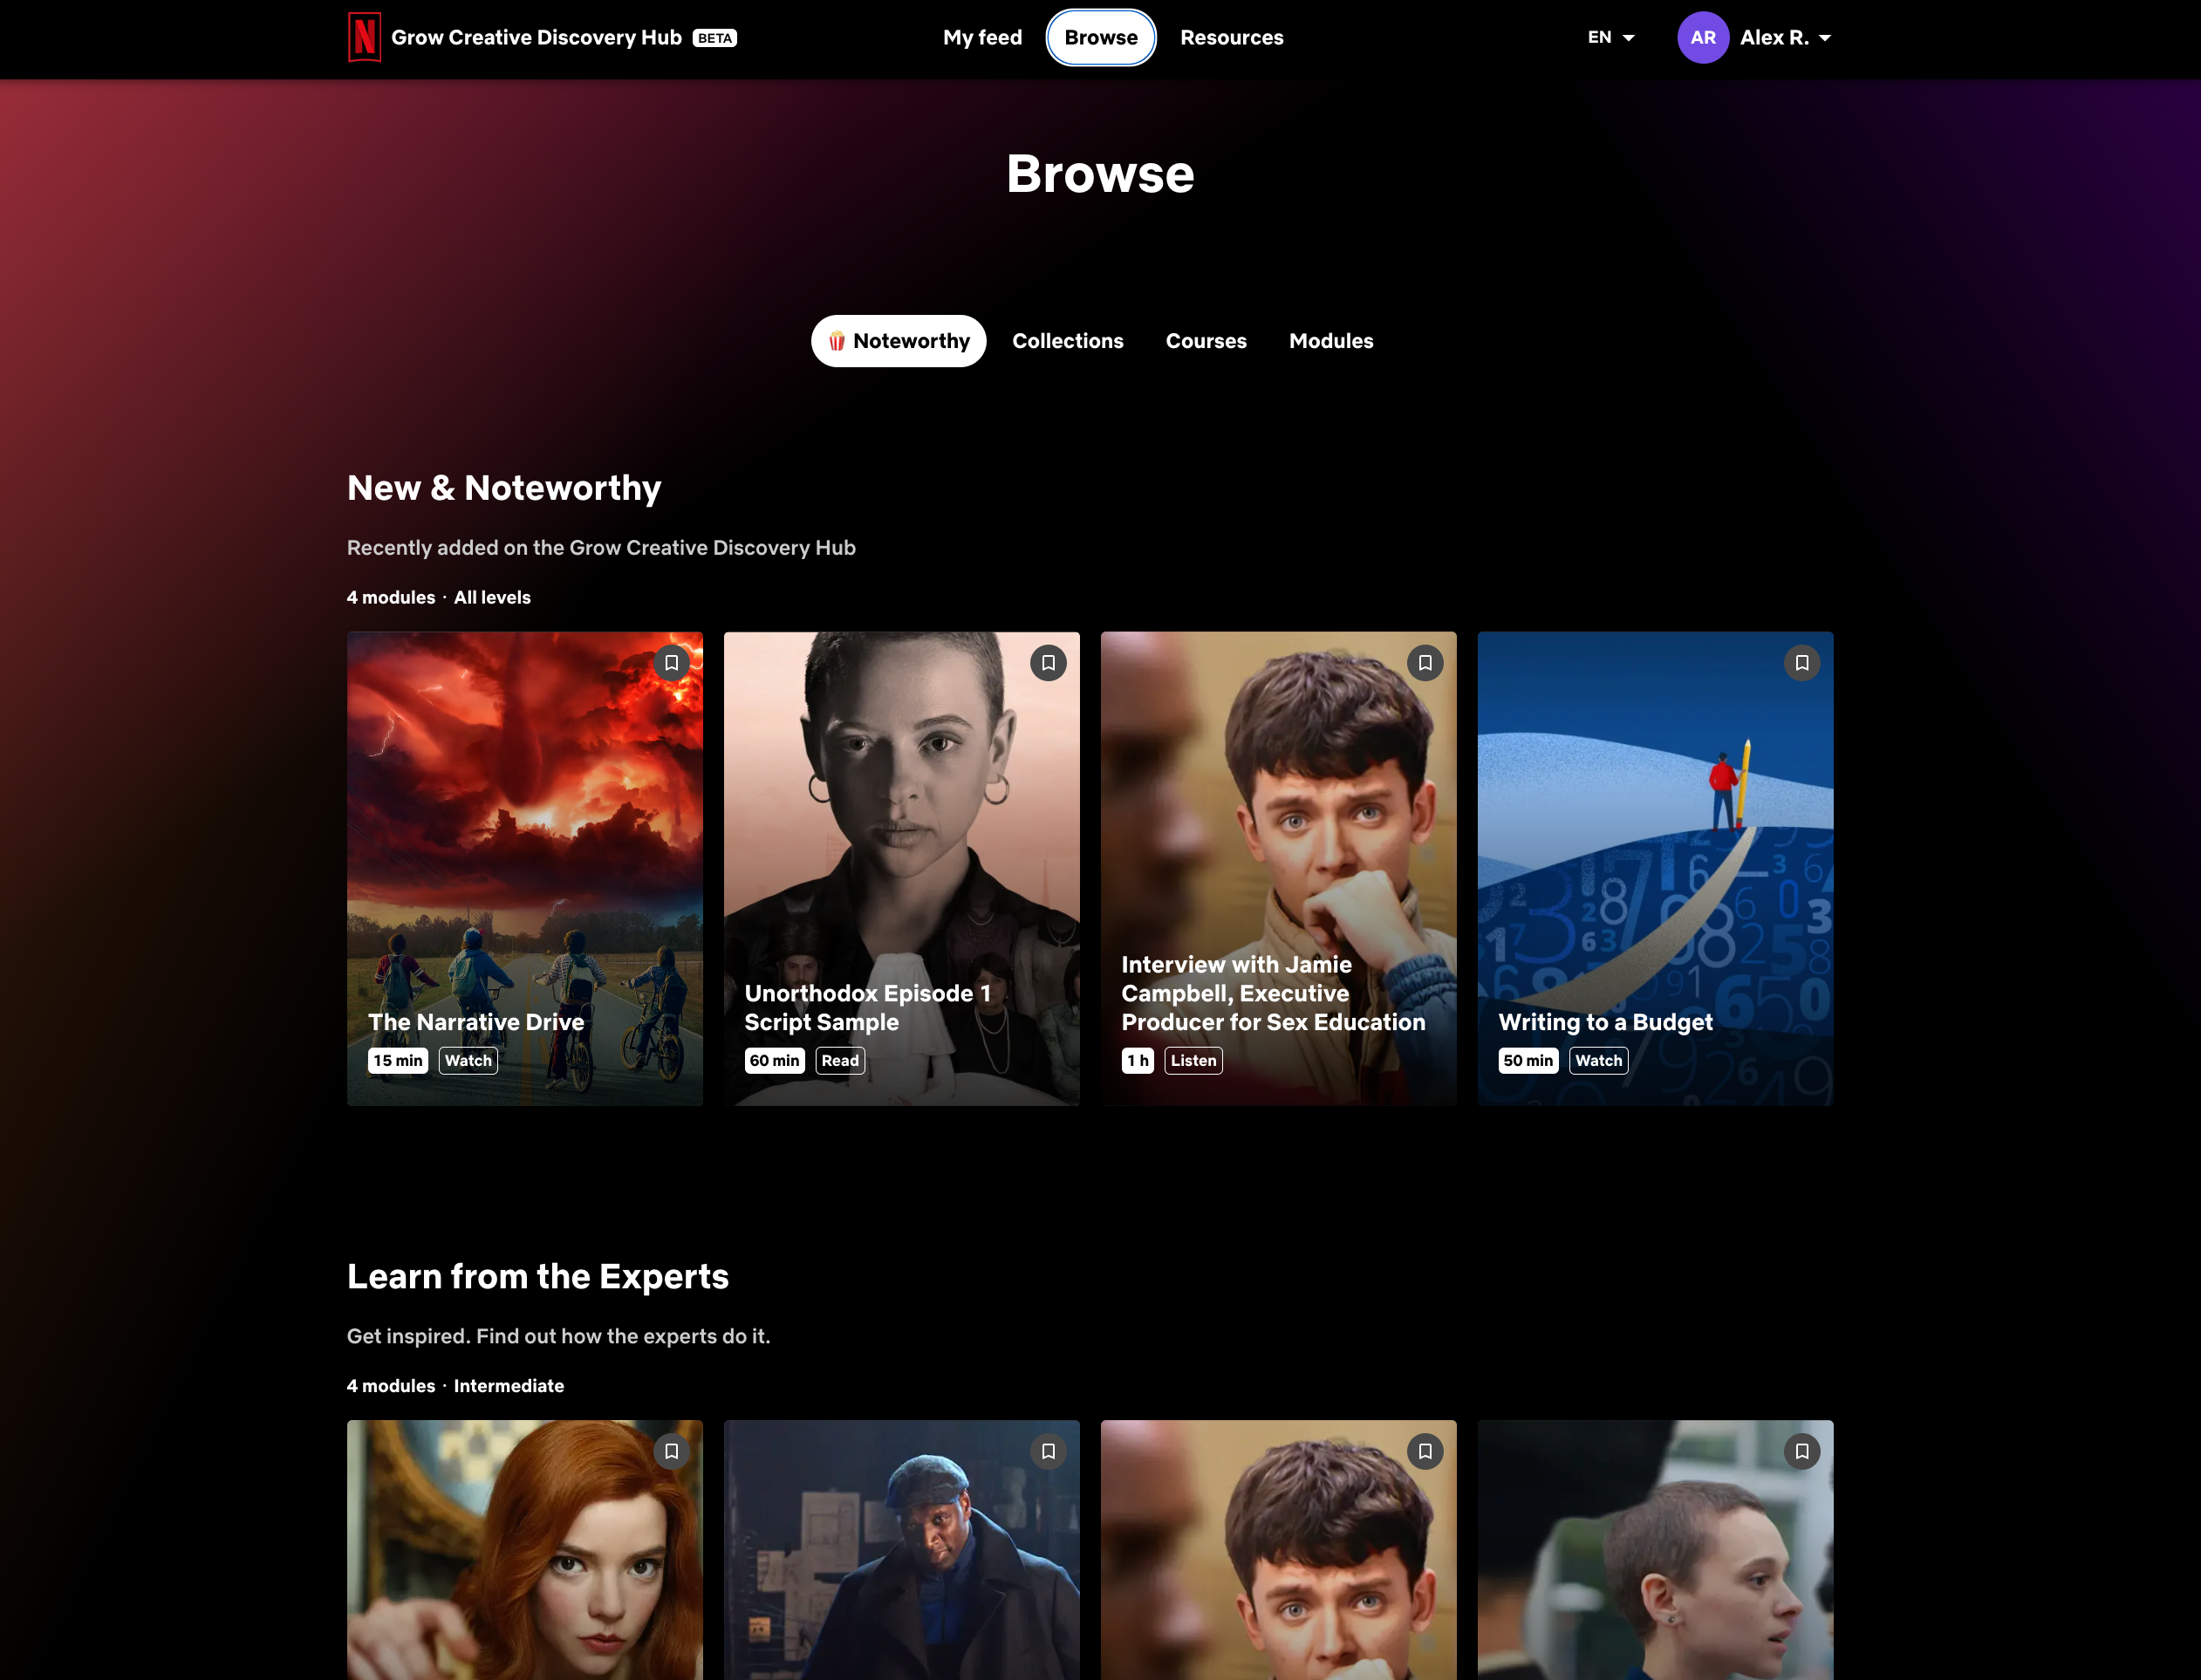 The browse page of the Discovery Hub